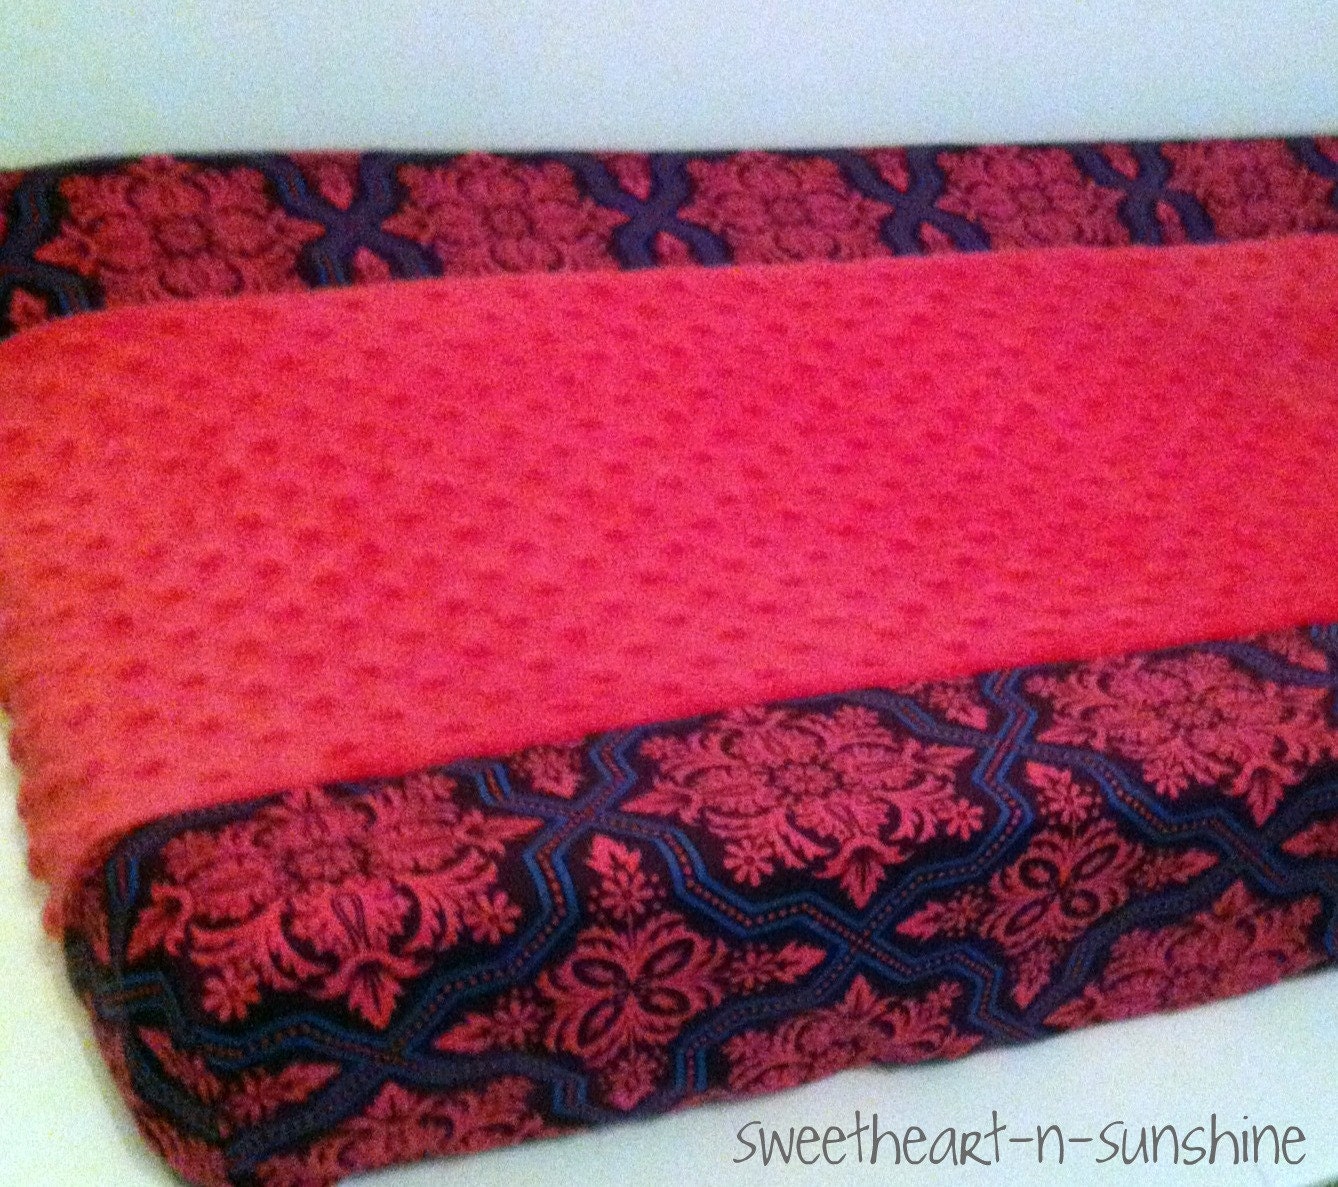 CUSTOM Two-toned Contoured Changing Pad Cover in YOUR CHOICE of designer cotton and minky dot fabrics